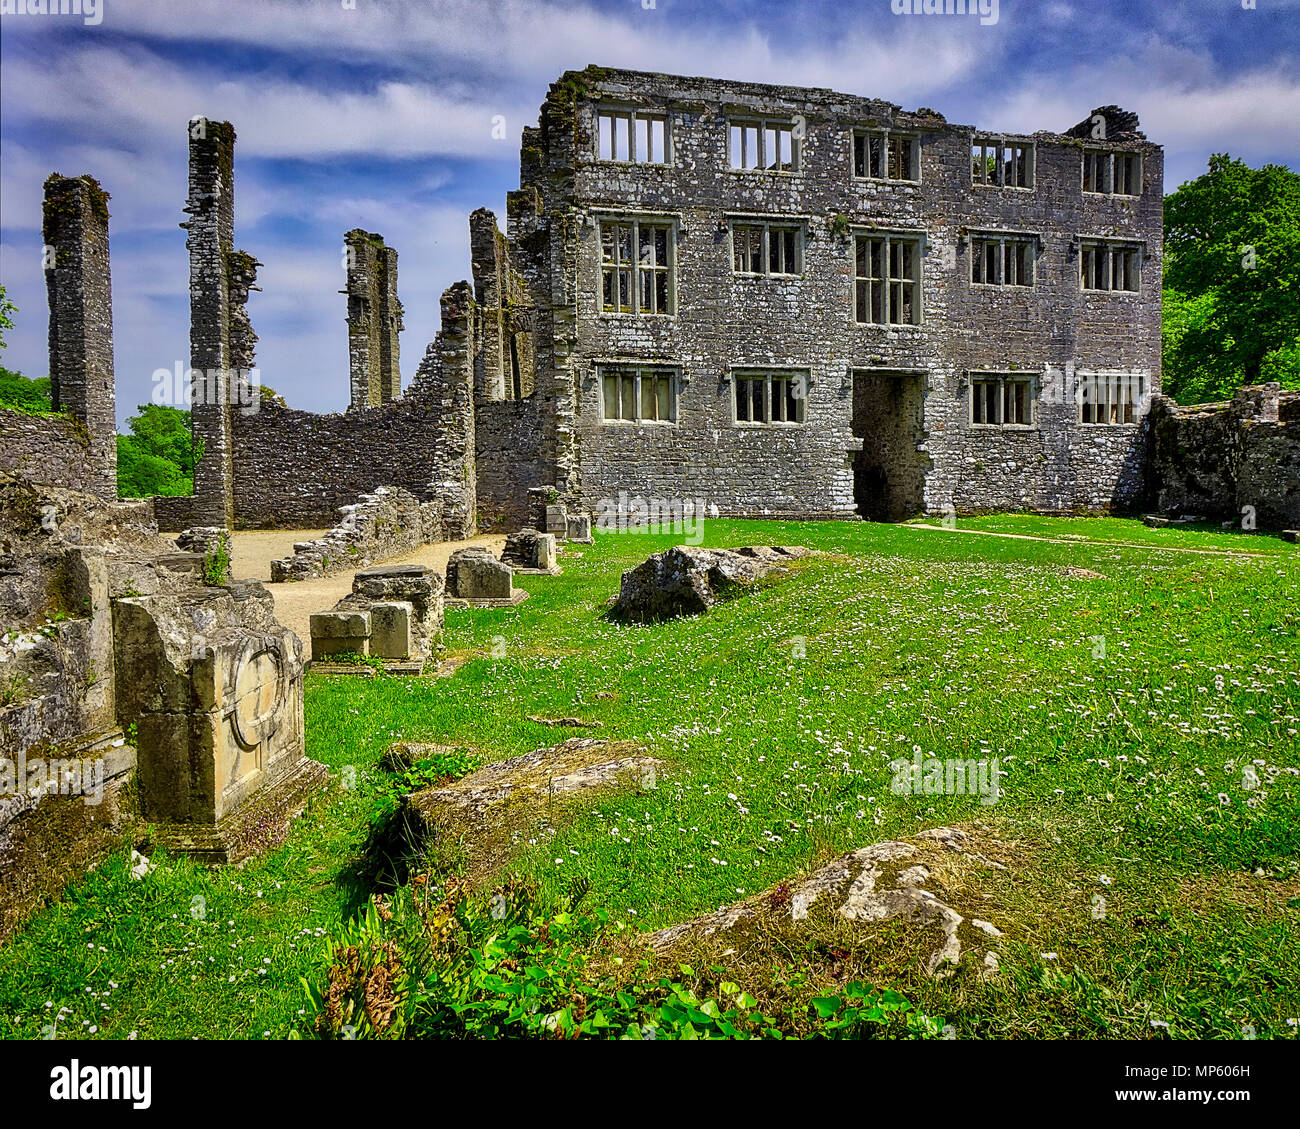 GB - DEVONSHIRE: Berry Pomeroy Castle - Lord Seymour's 16th century mansion Stock Photo